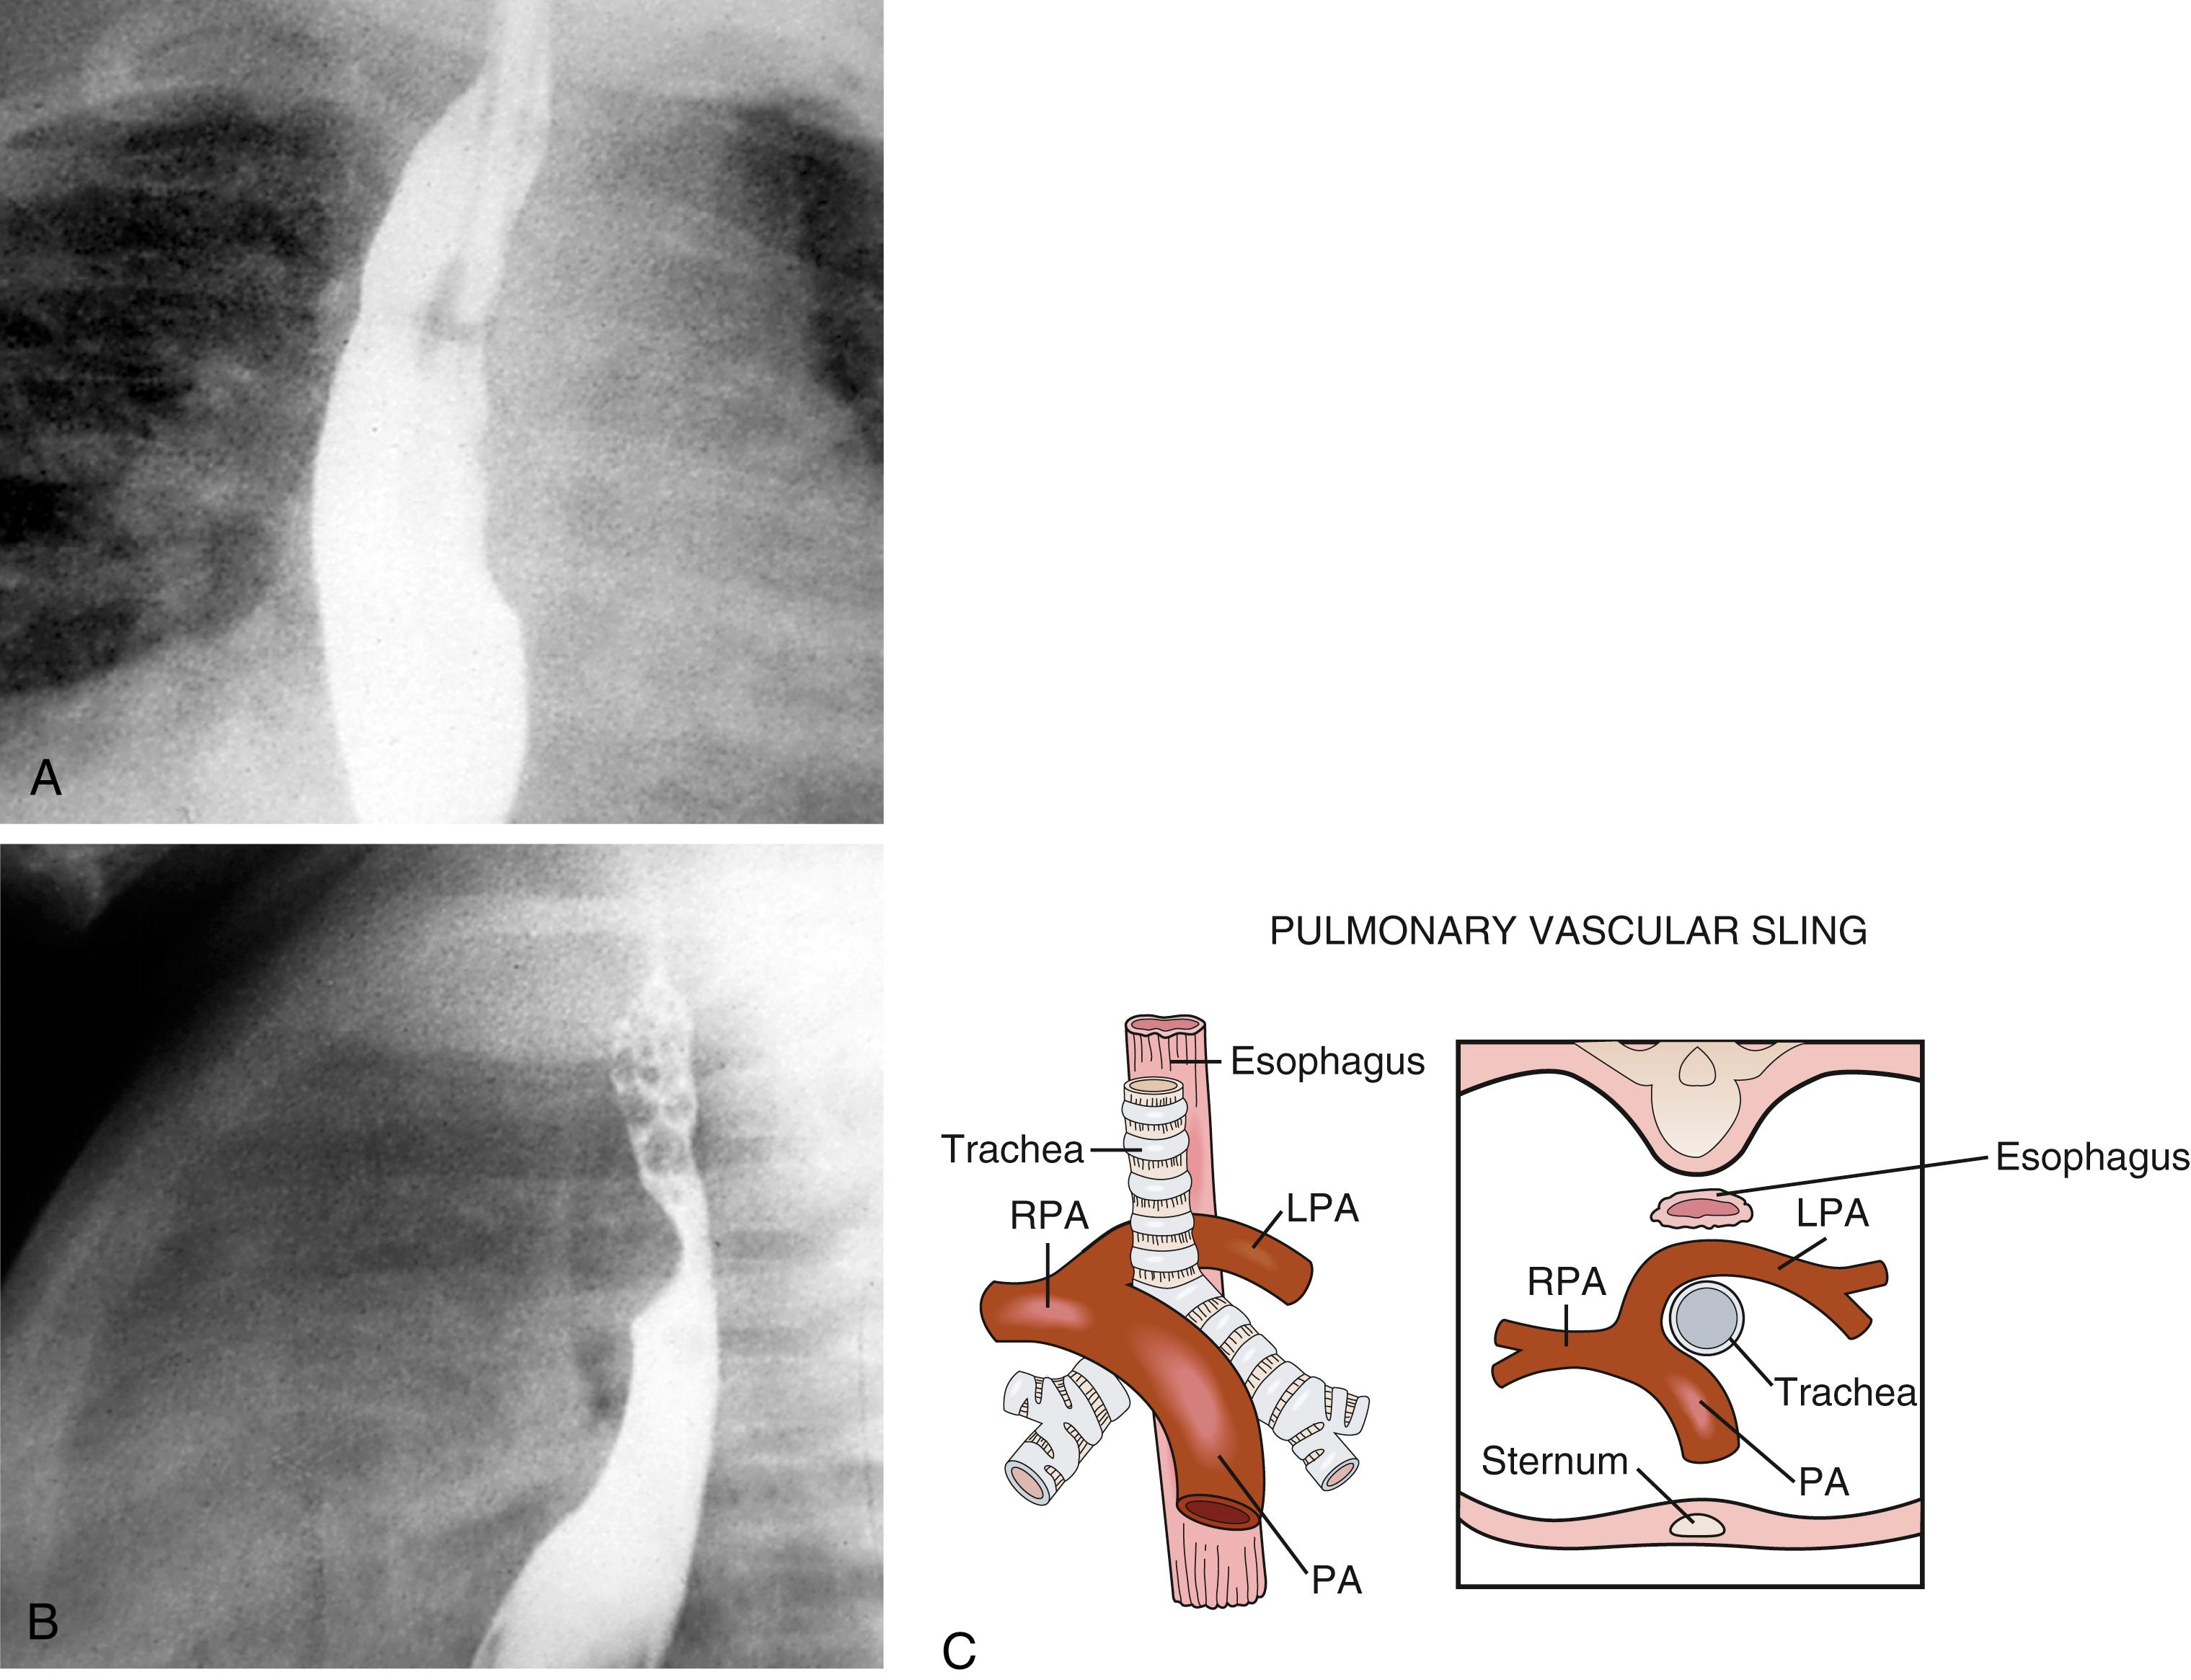 Fig. 5.31, Anomalous left pulmonary artery (pulmonary artery sling). Note the anterior rounded indentation in the barium-filled esophagus and the posterior bulge into the air-filled trachea anteriorly. (A) Anterior view of barium-filled esophagus. (B) Lateral view: Note the anterior rounded indentation in the barium-filled esophagus and the posterior bulge into the air-filled trachea anteriorly. (C) Diagram of vascular anatomy and relationships to trachea and esophagus. LPA, Left pulmonary artery; PA, pulmonary artery; RPA, right pulmonary artery.